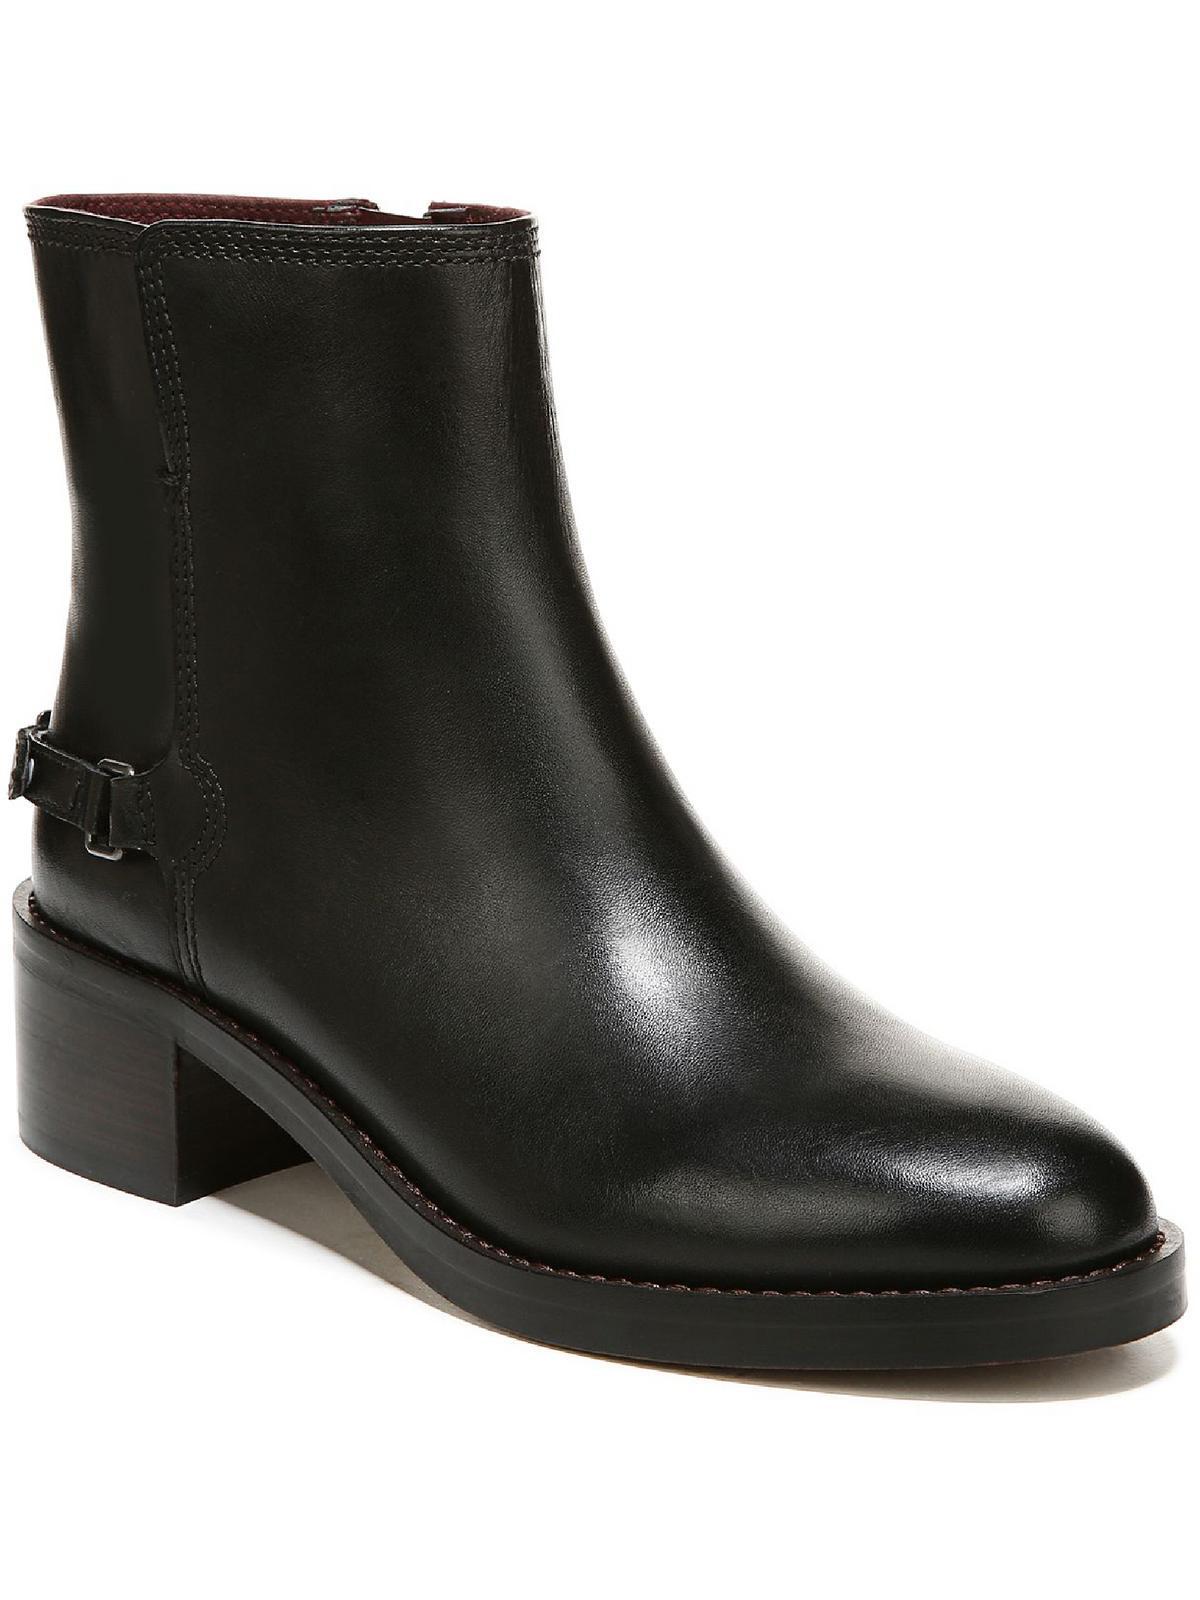 Franco Sarto Colt Leather Comfort Booties in Black | Lyst